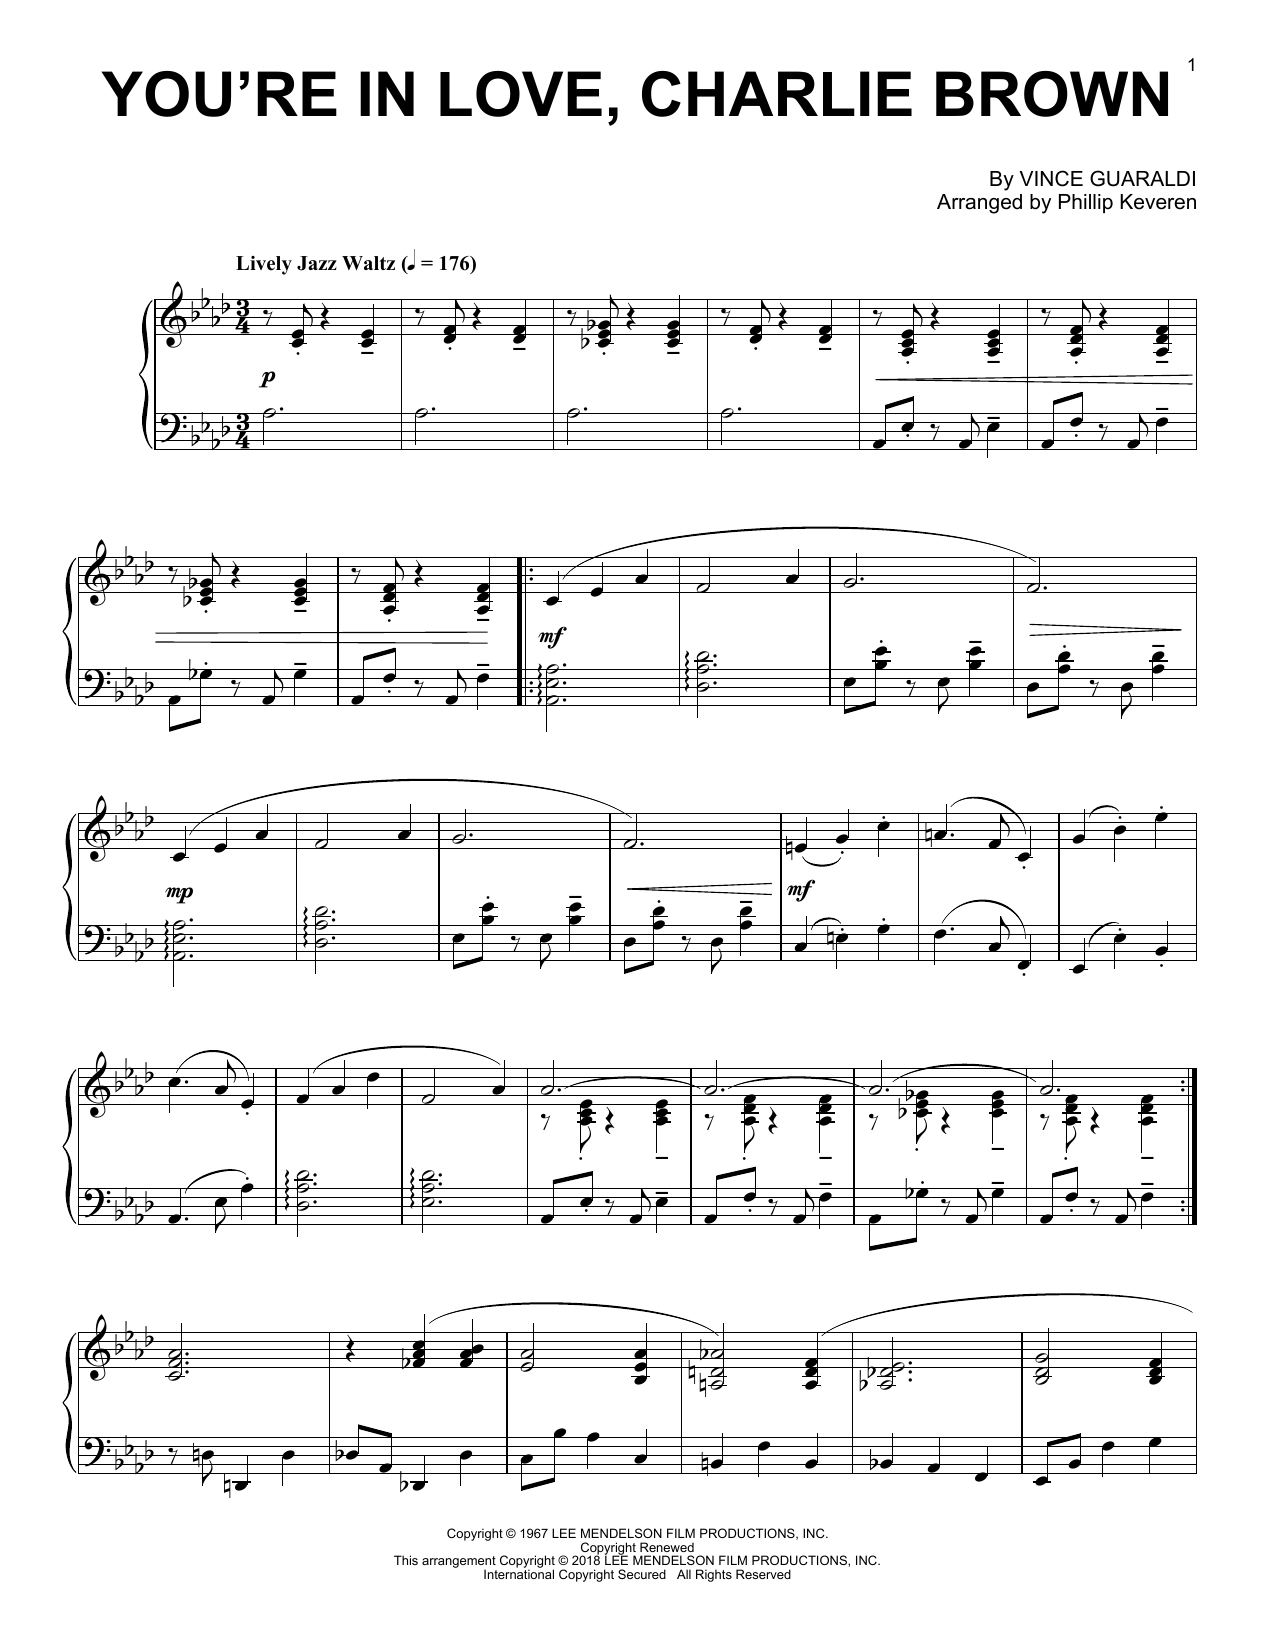 Download Vince Guaraldi You're In Love, Charlie Brown (arr. Phi Sheet Music